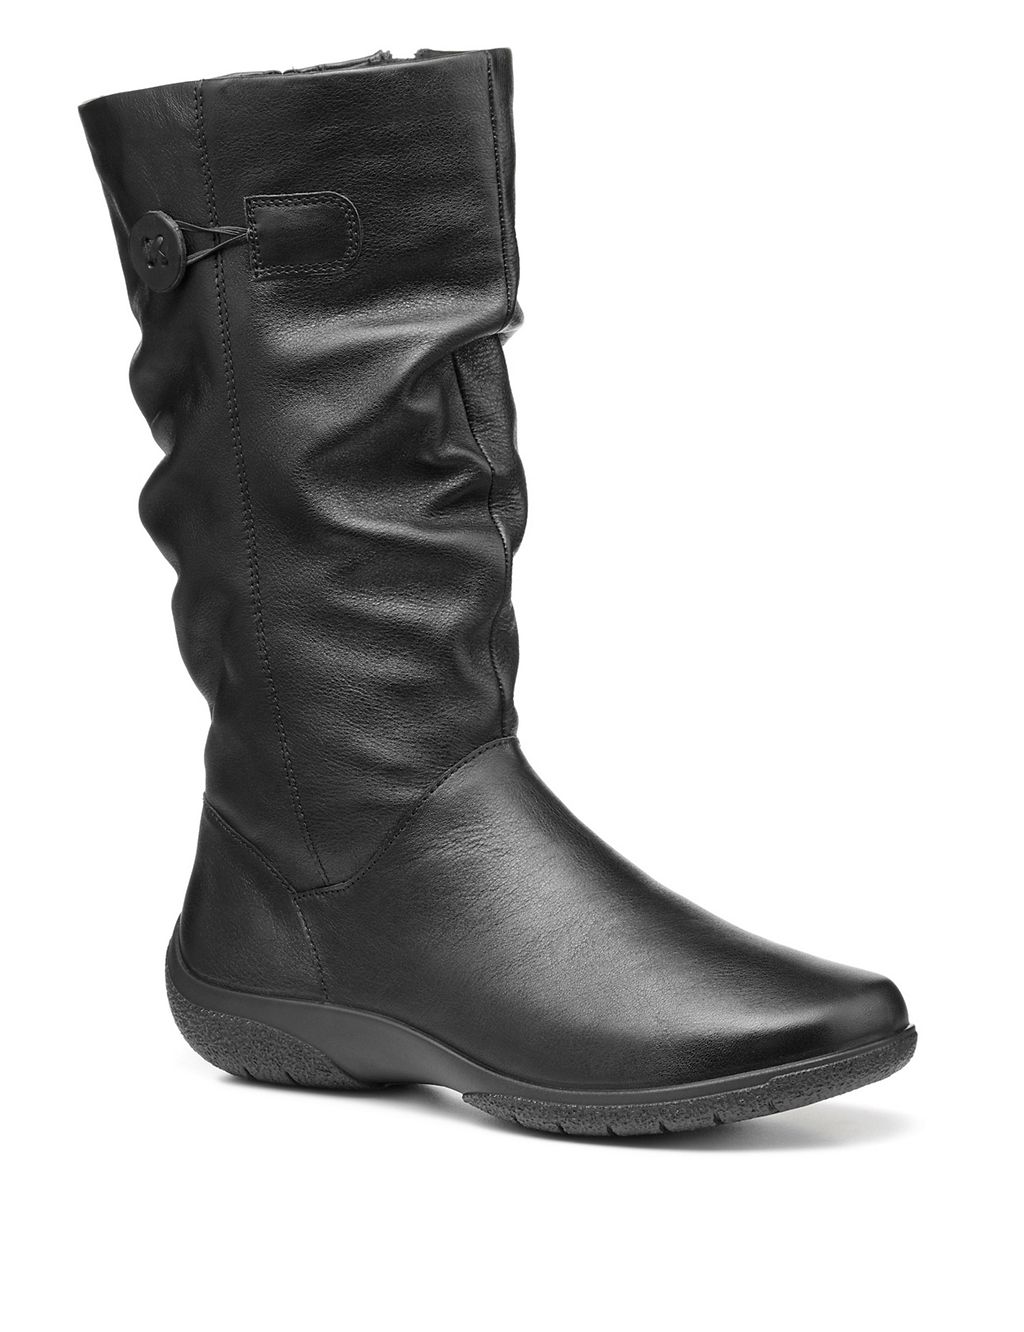 Derrymore II Wide Fit Leather Boots | Hotter | M&S